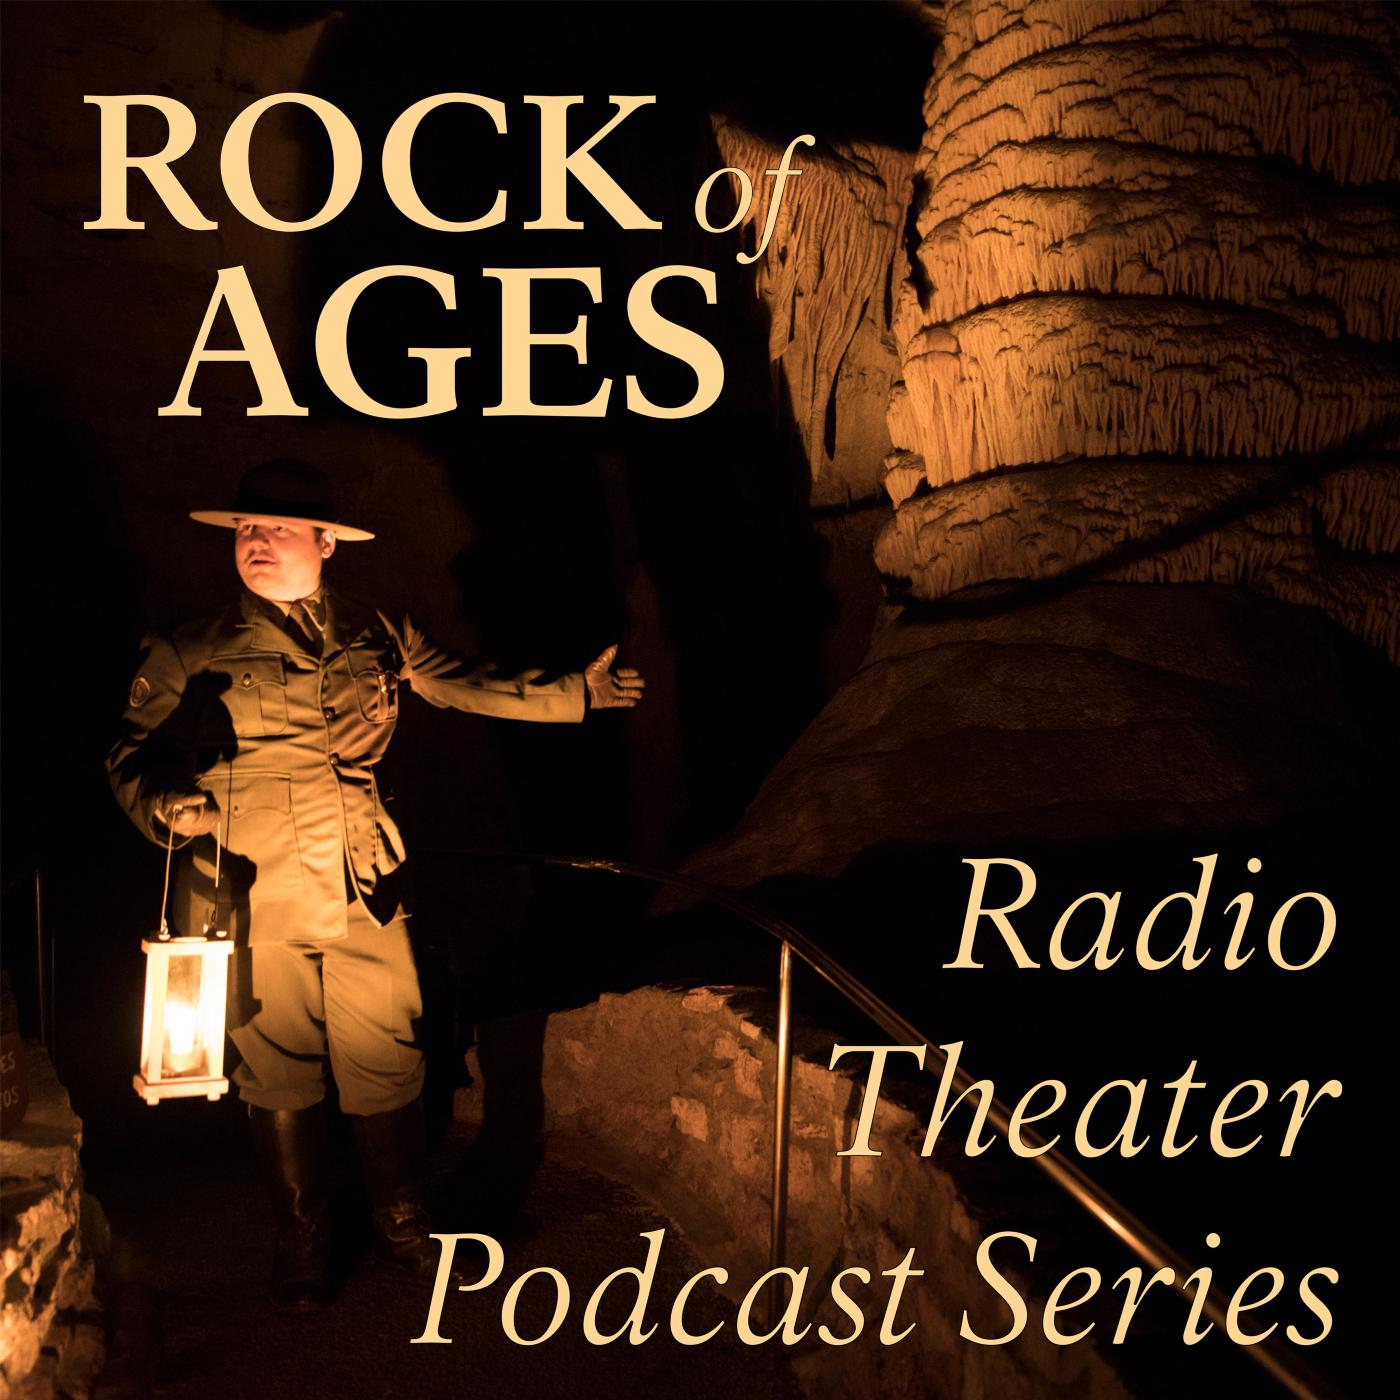 Rock of Ages Program icon with an actor portraying a ranger from the past holding a lantern.